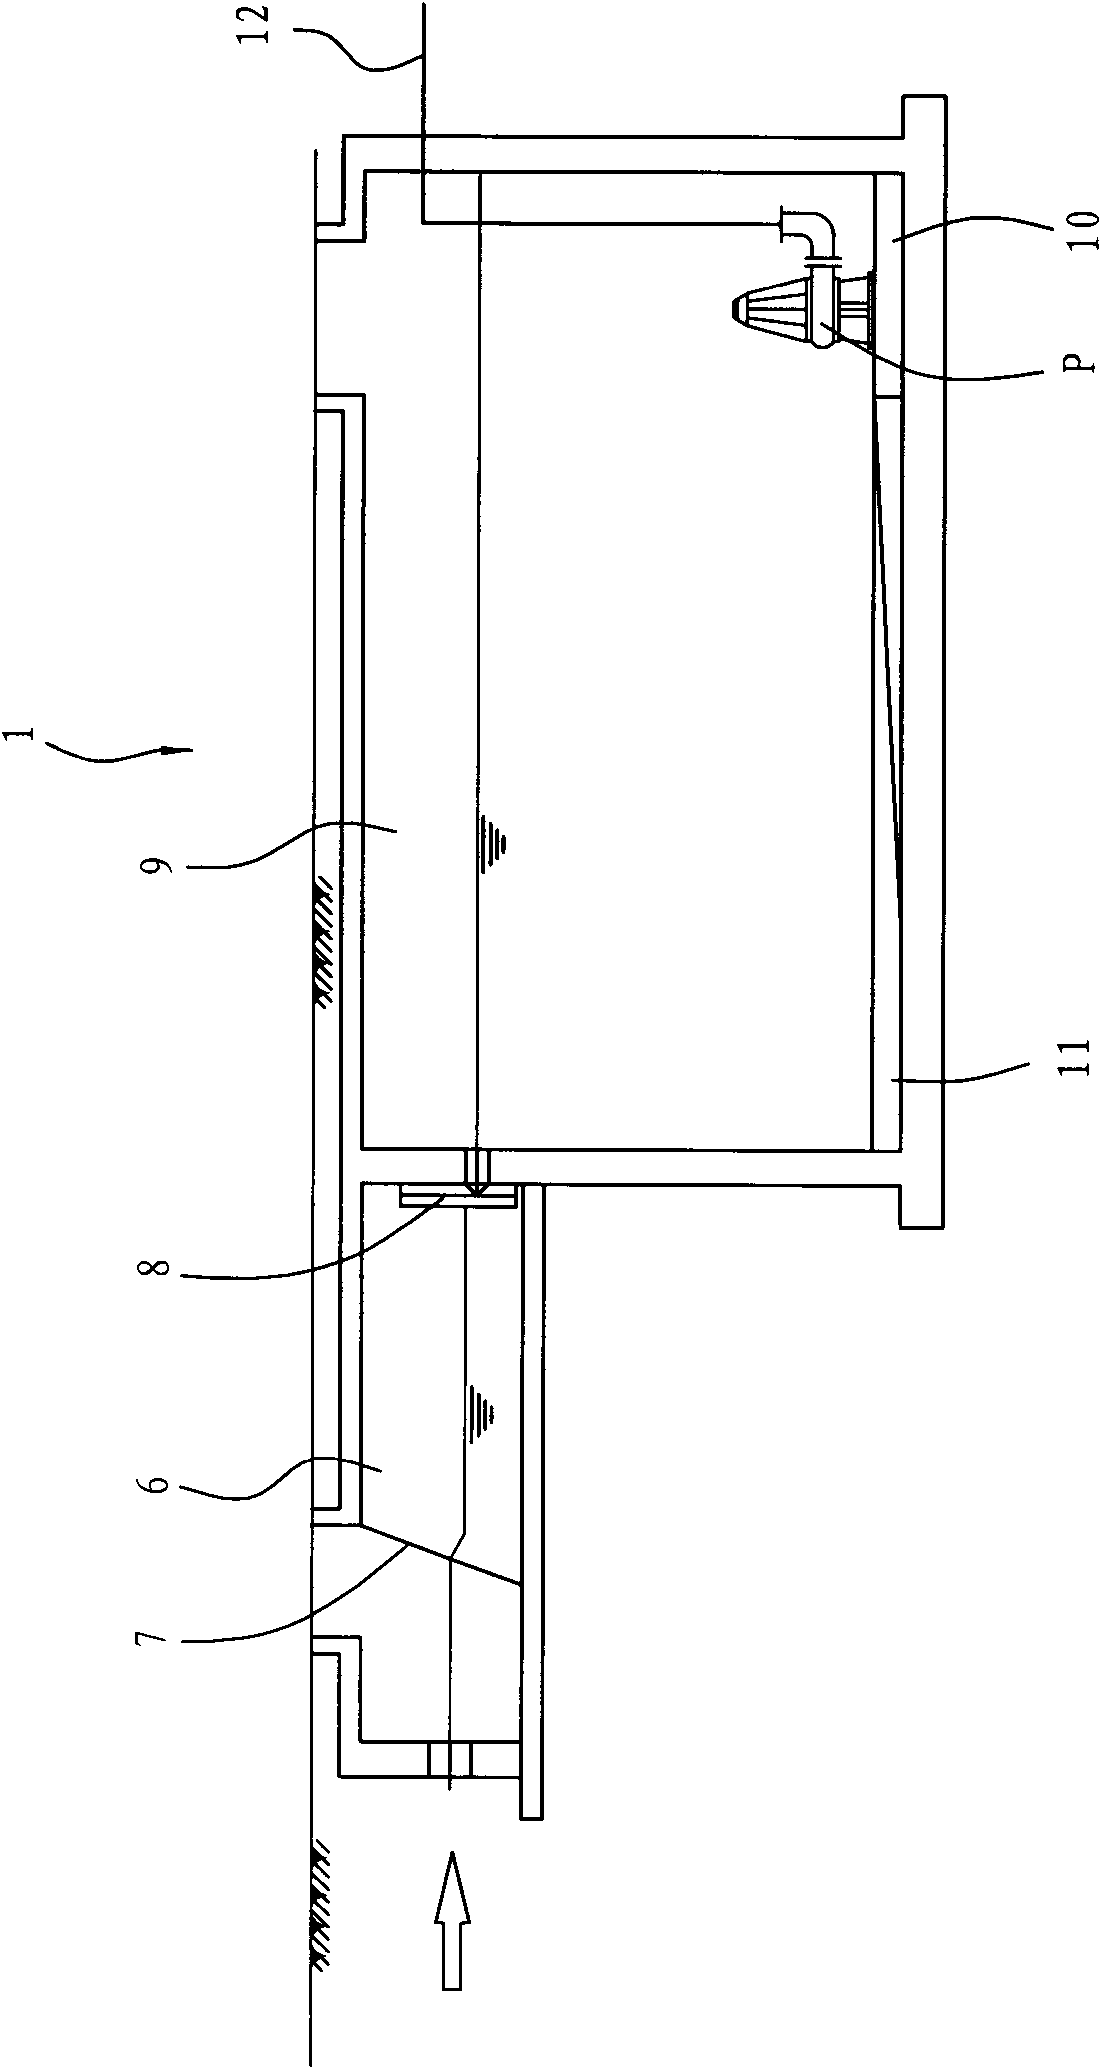 Artificial wetland sewage treatment method and system